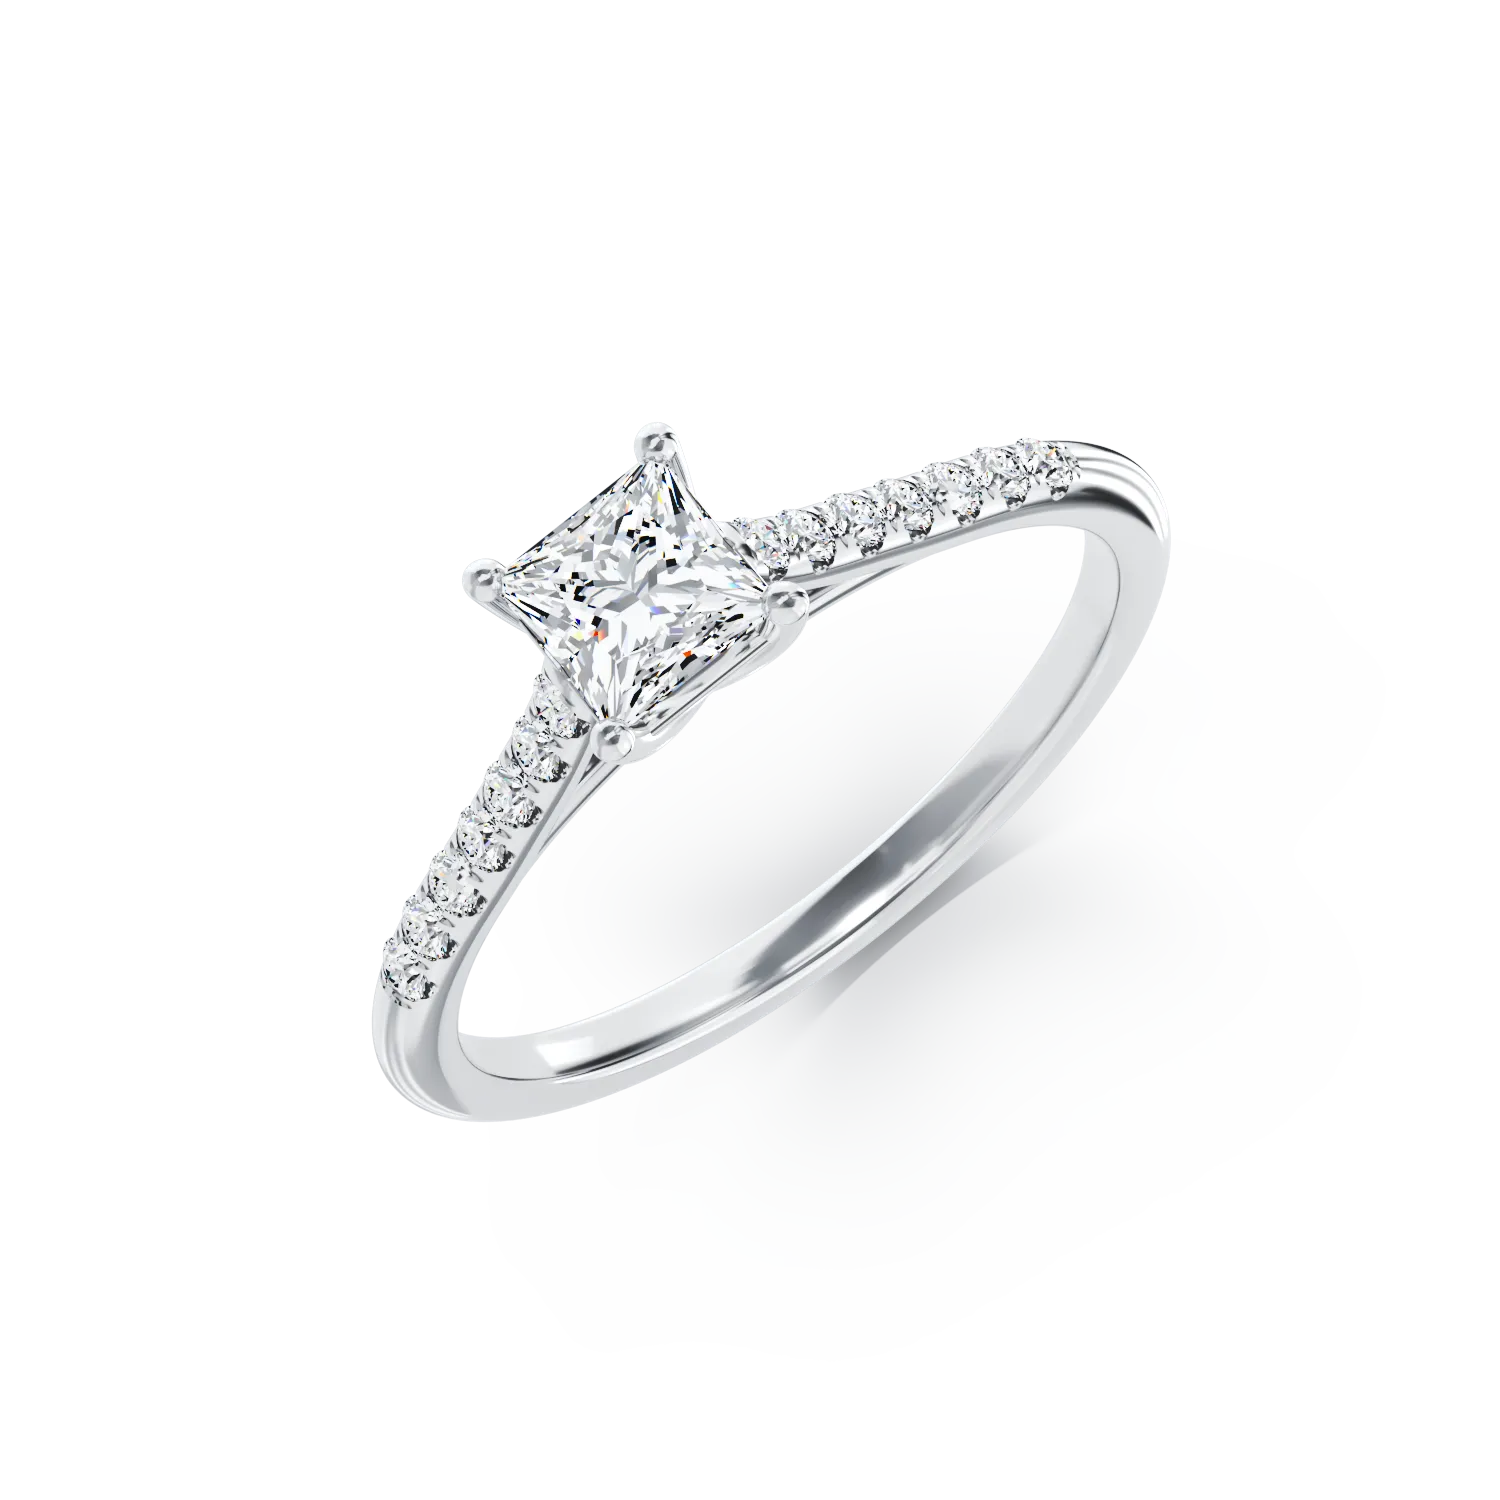 18K white gold engagement ring with 0.475ct diamond and 0.16ct diamonds